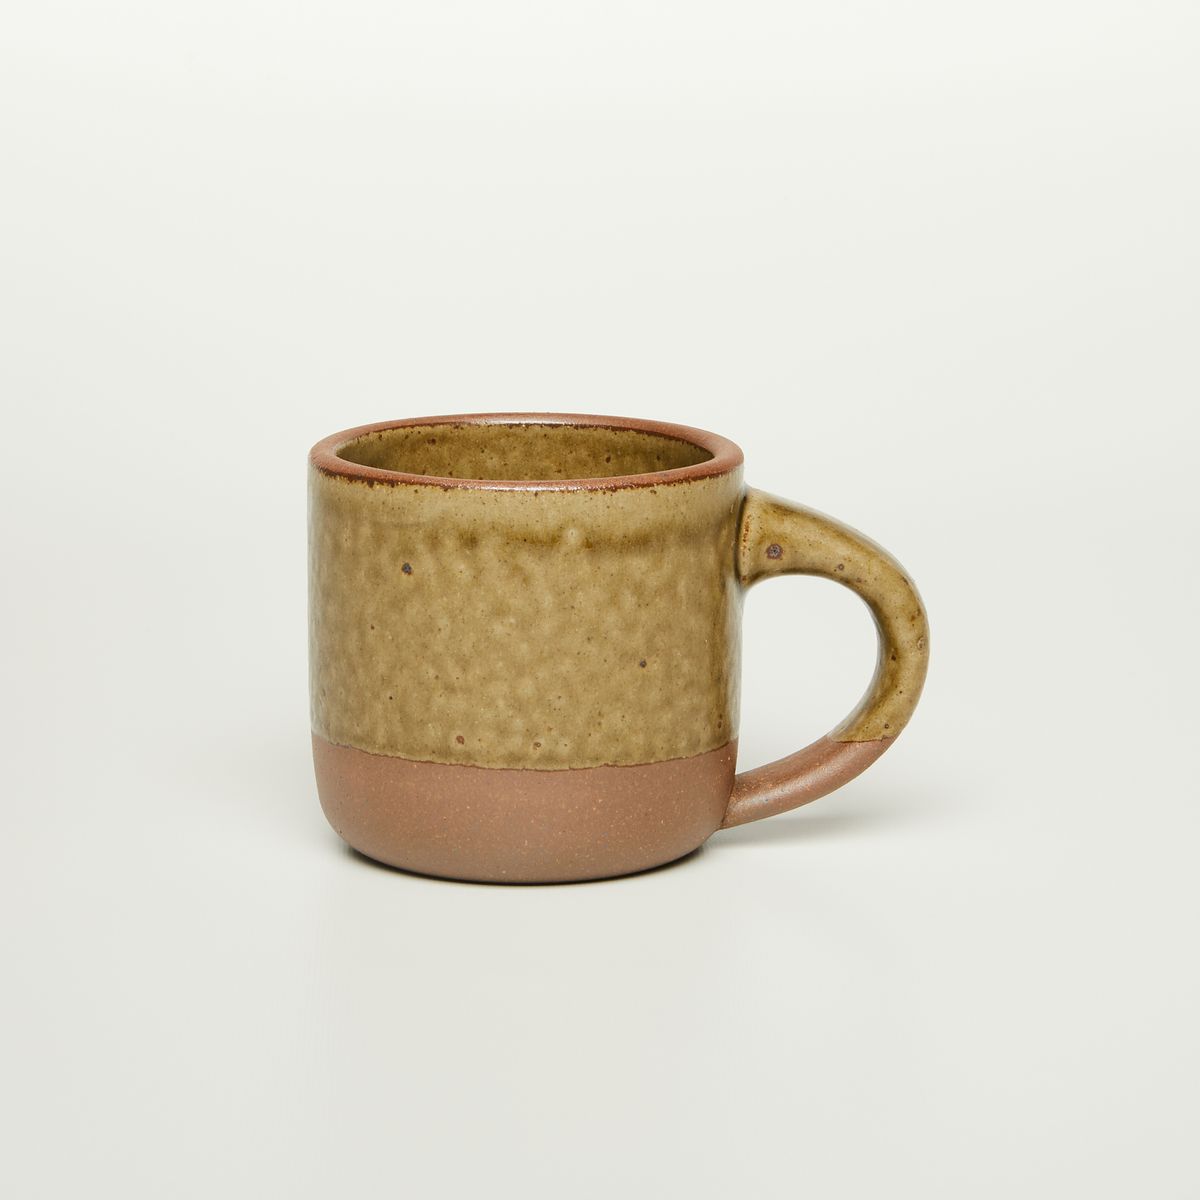 A small sized ceramic mug with handle in an earthy green and brown color featuring iron speckles and unglazed rim and bottom base.